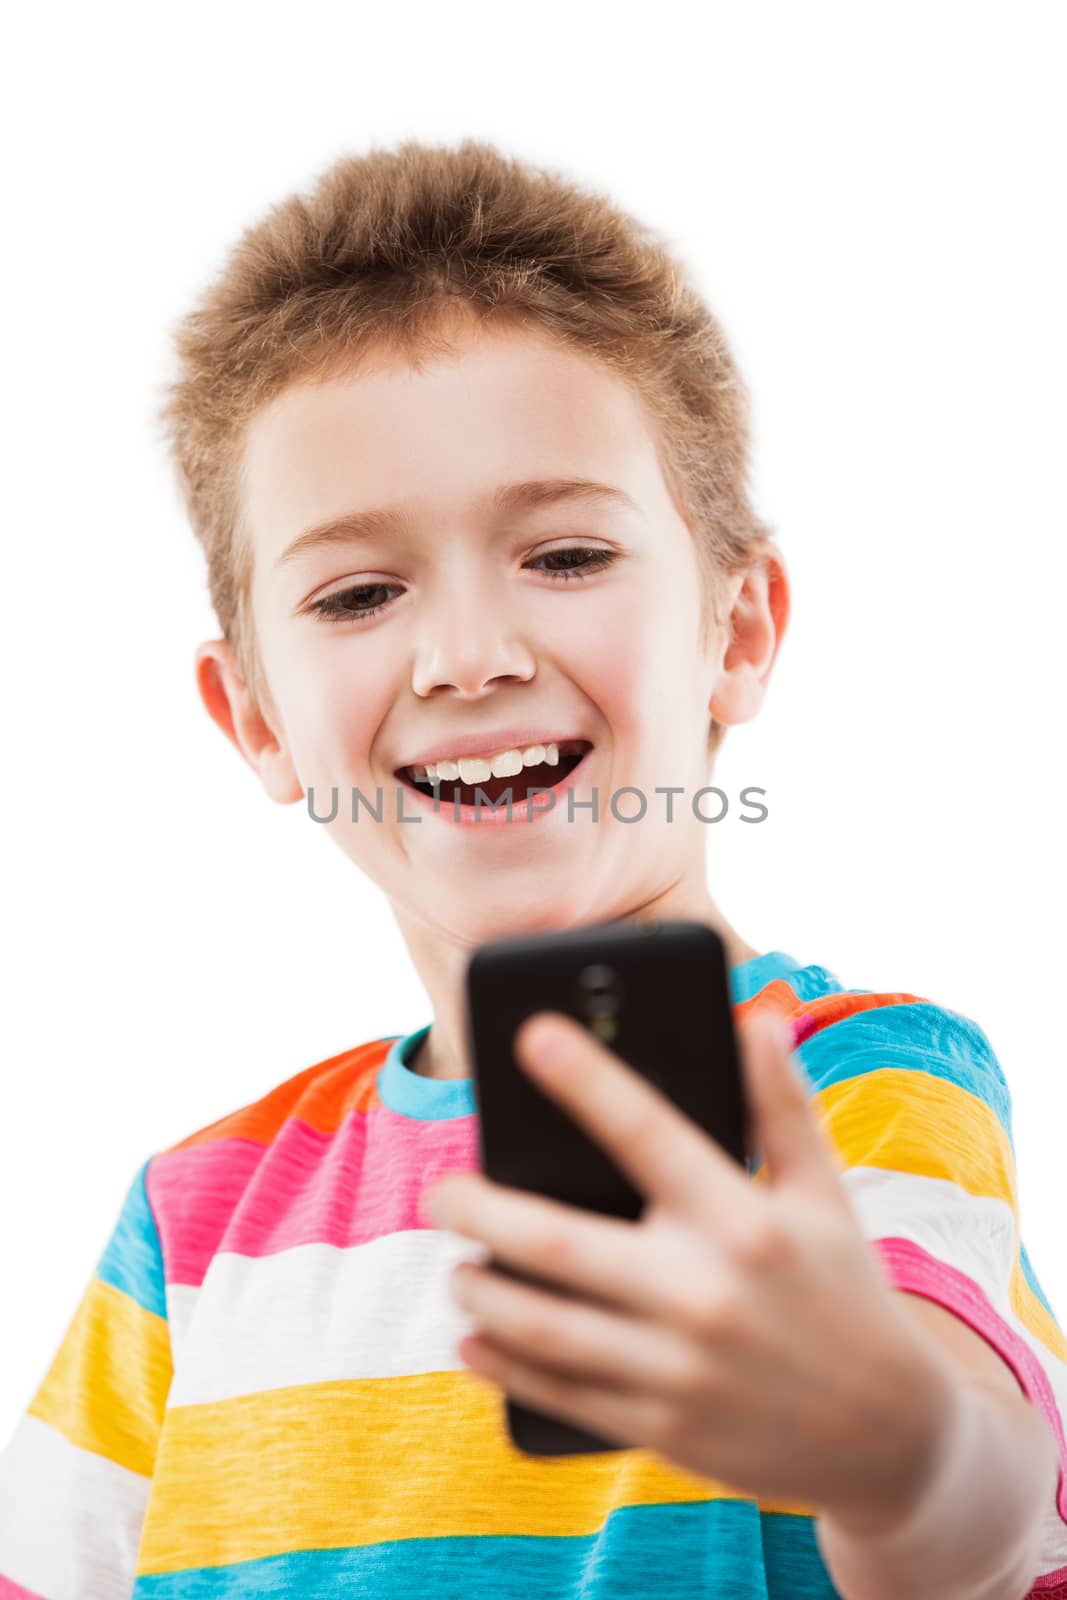 Little smiling child boy hand holding mobile phone or smartphone making selfie portrait photo white isolated